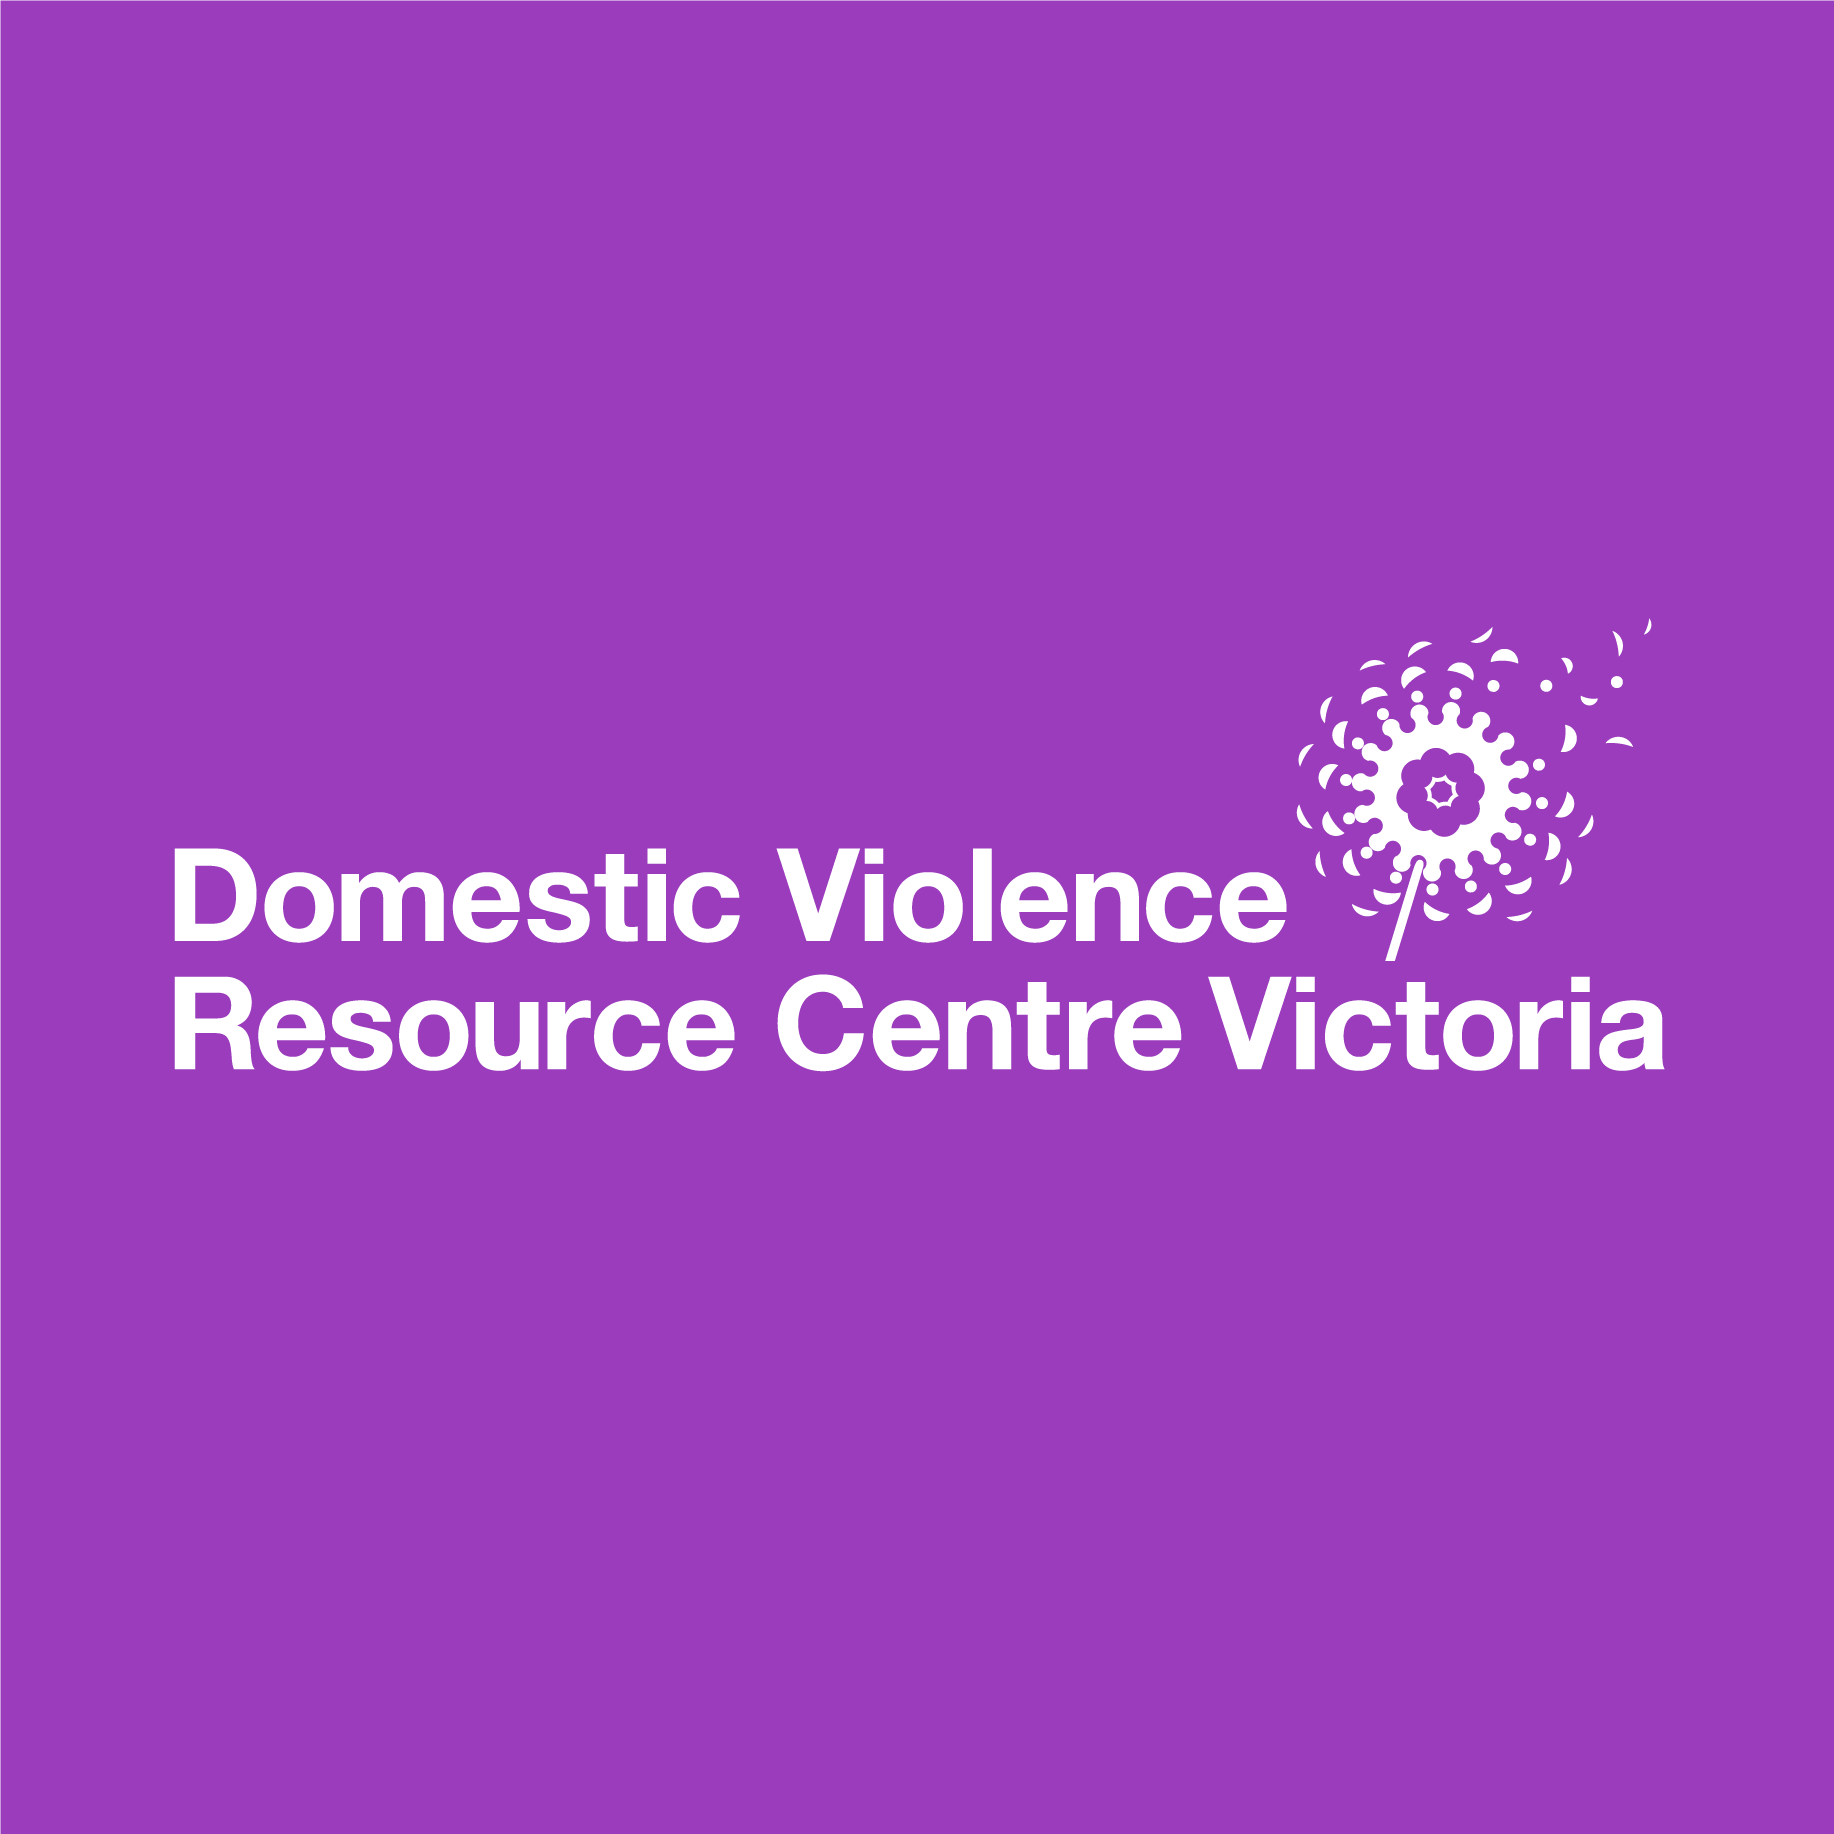 New integrated service delivery model resource pack for family violence organisations and referral partners